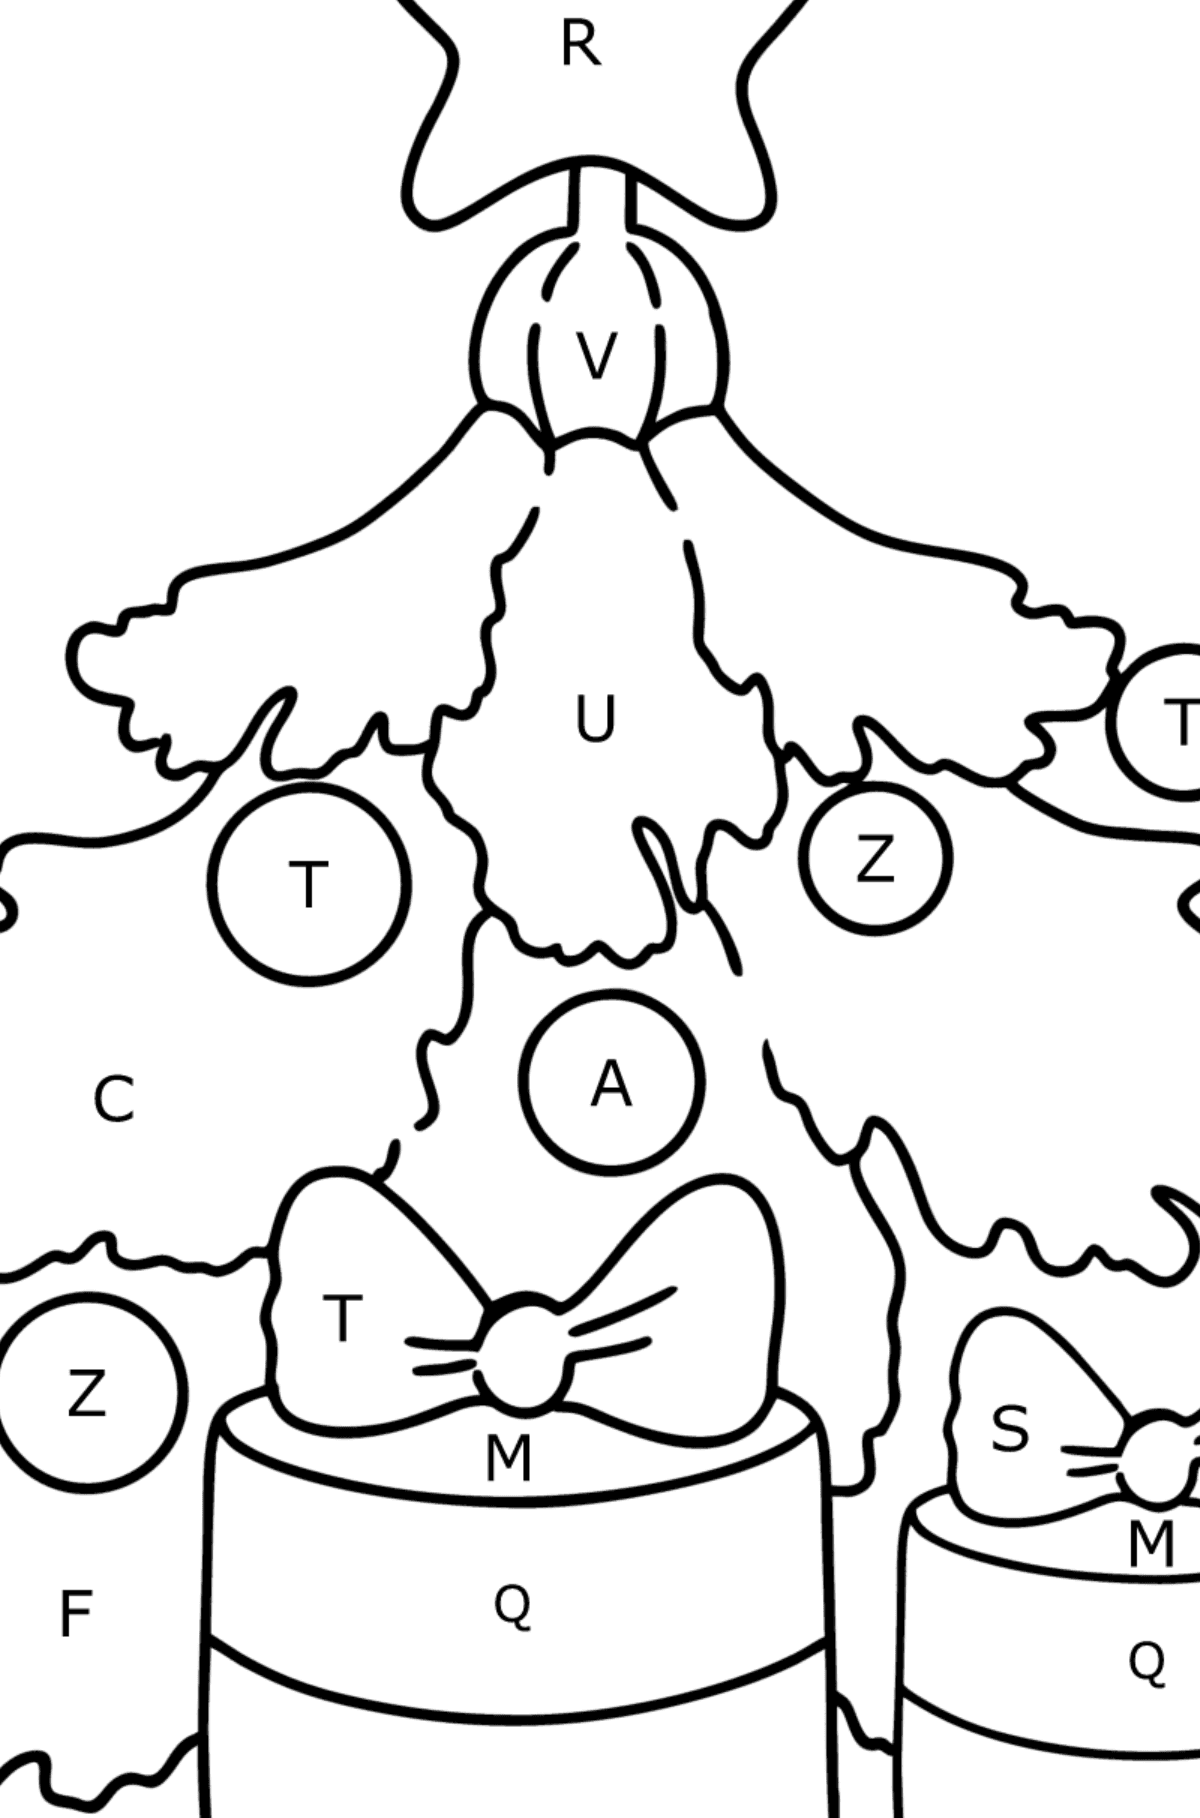 Christmas Tree and Gifts coloring page - Coloring by Letters for Kids